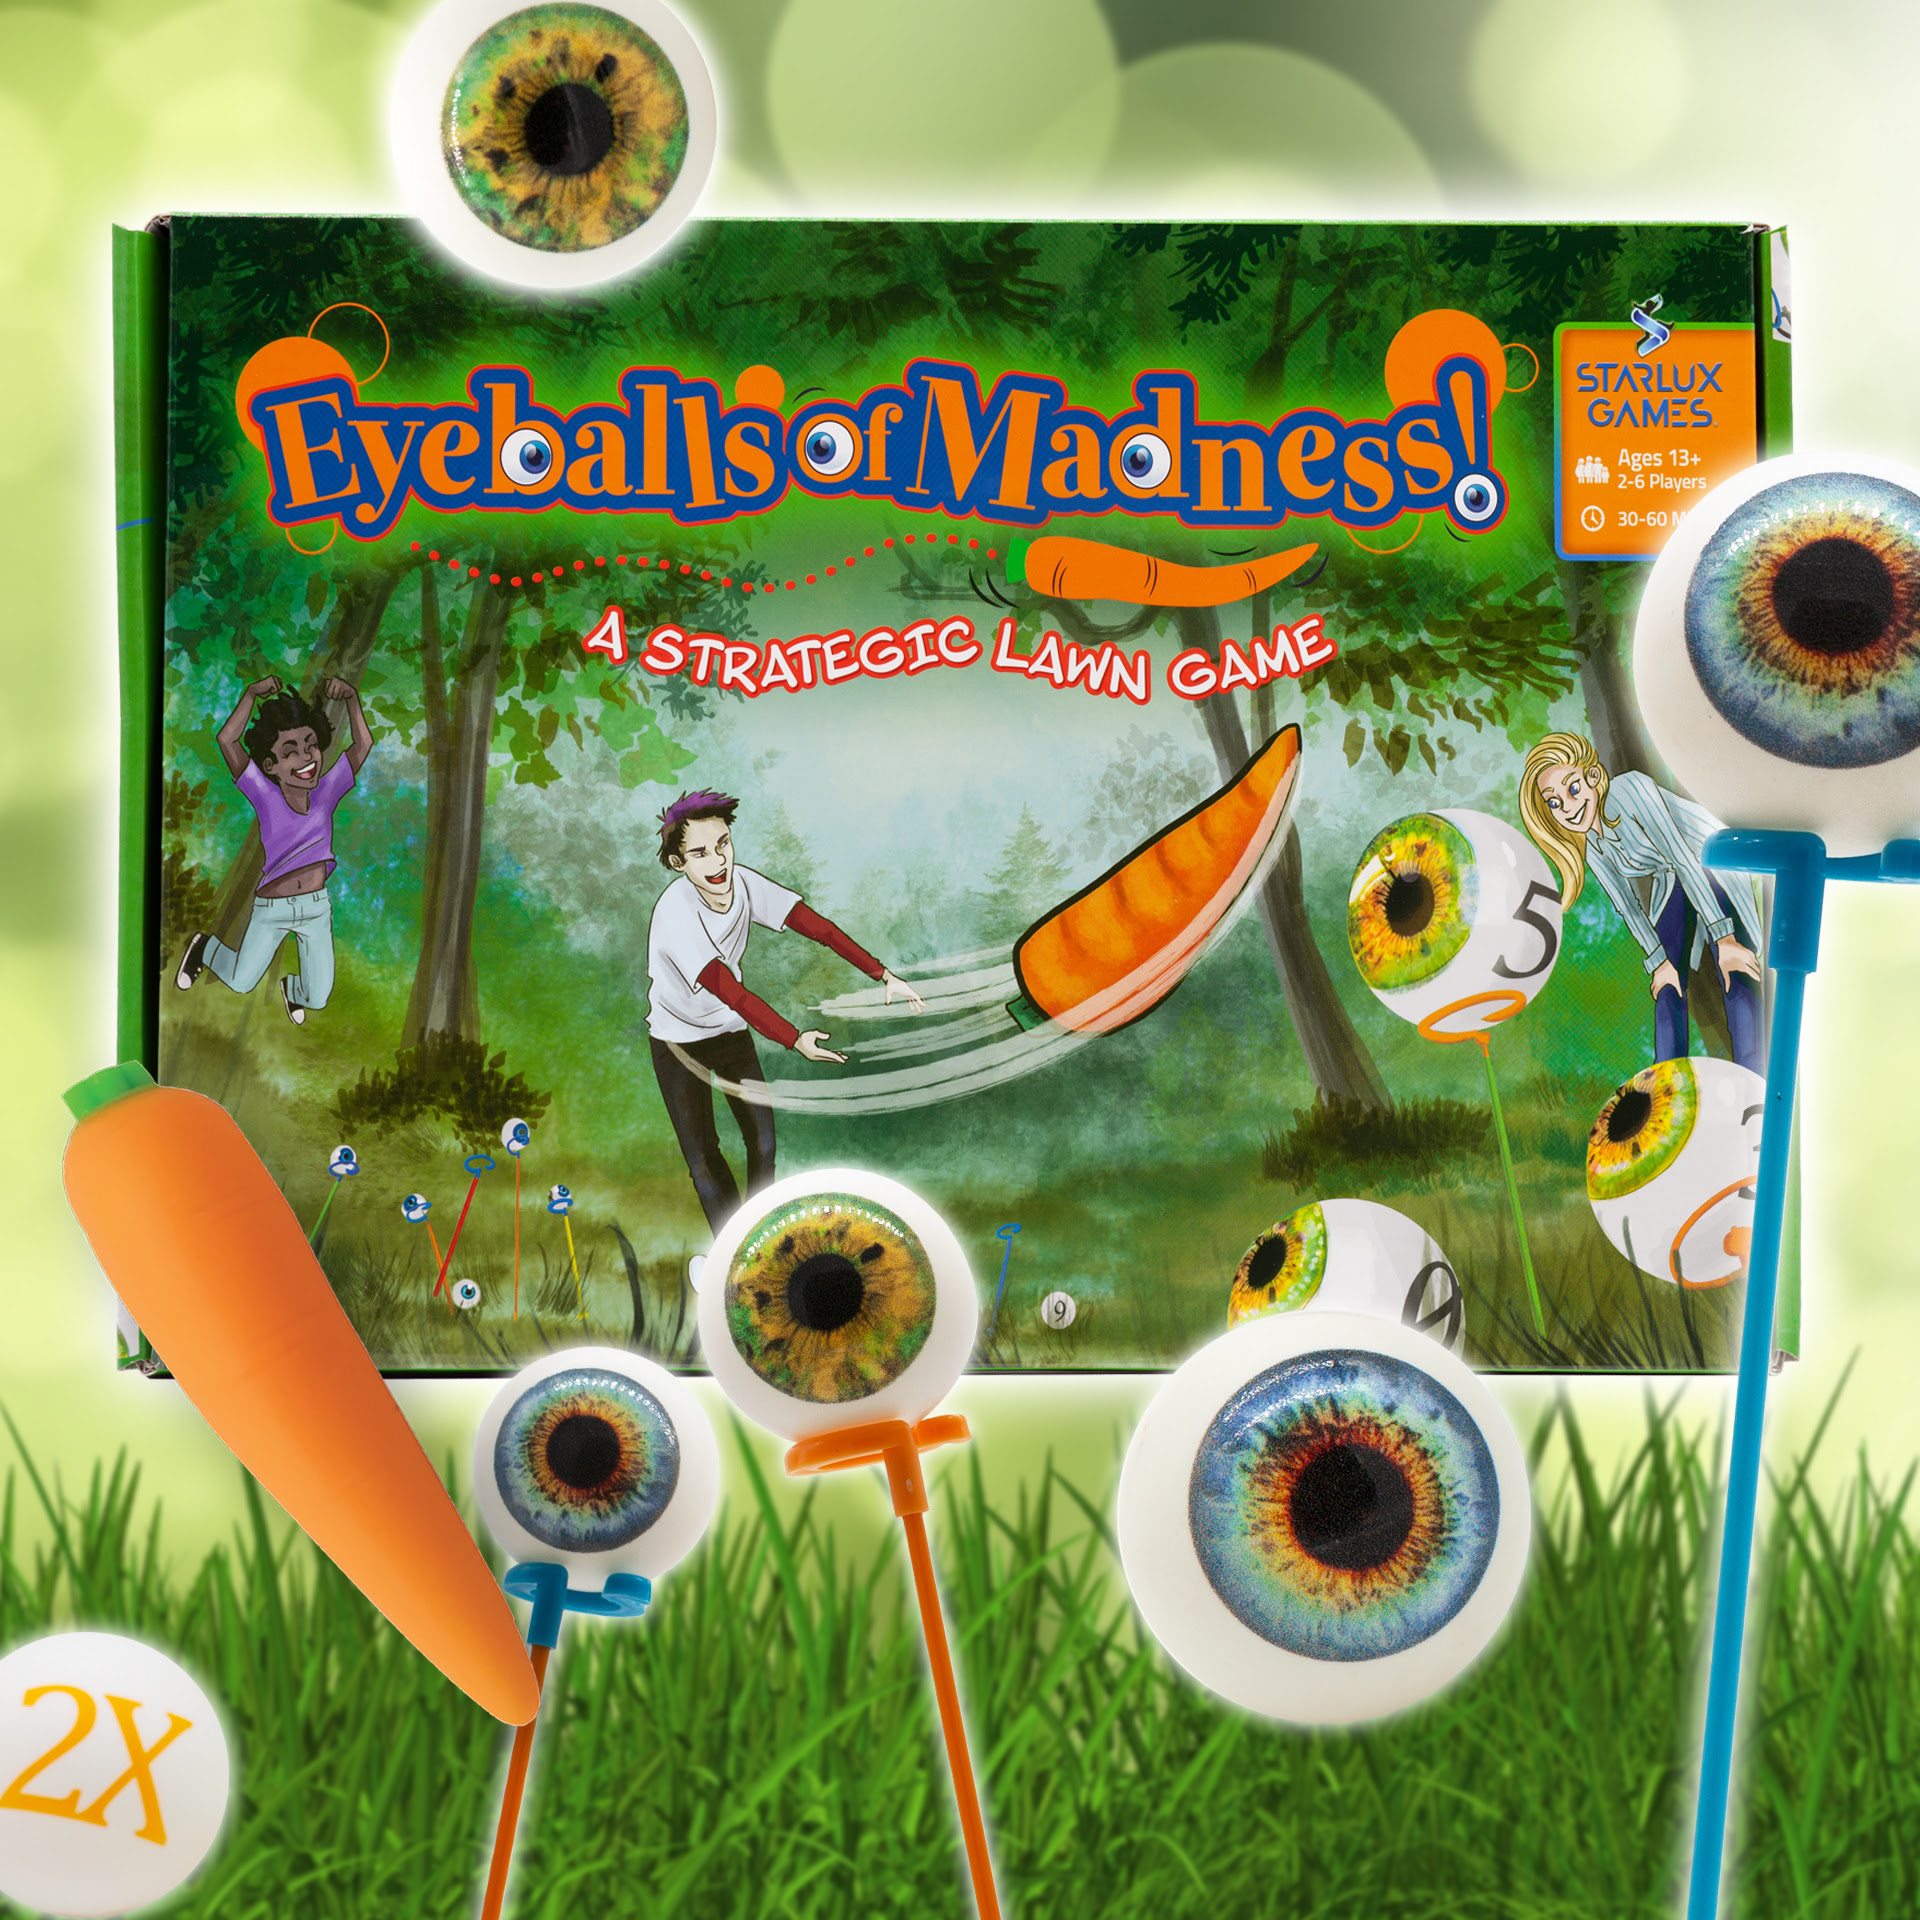 A Lawn Game Like No Other - Eyeballs of Madness by Starlux Games  #MegaChristmas22 - It's Free At Last